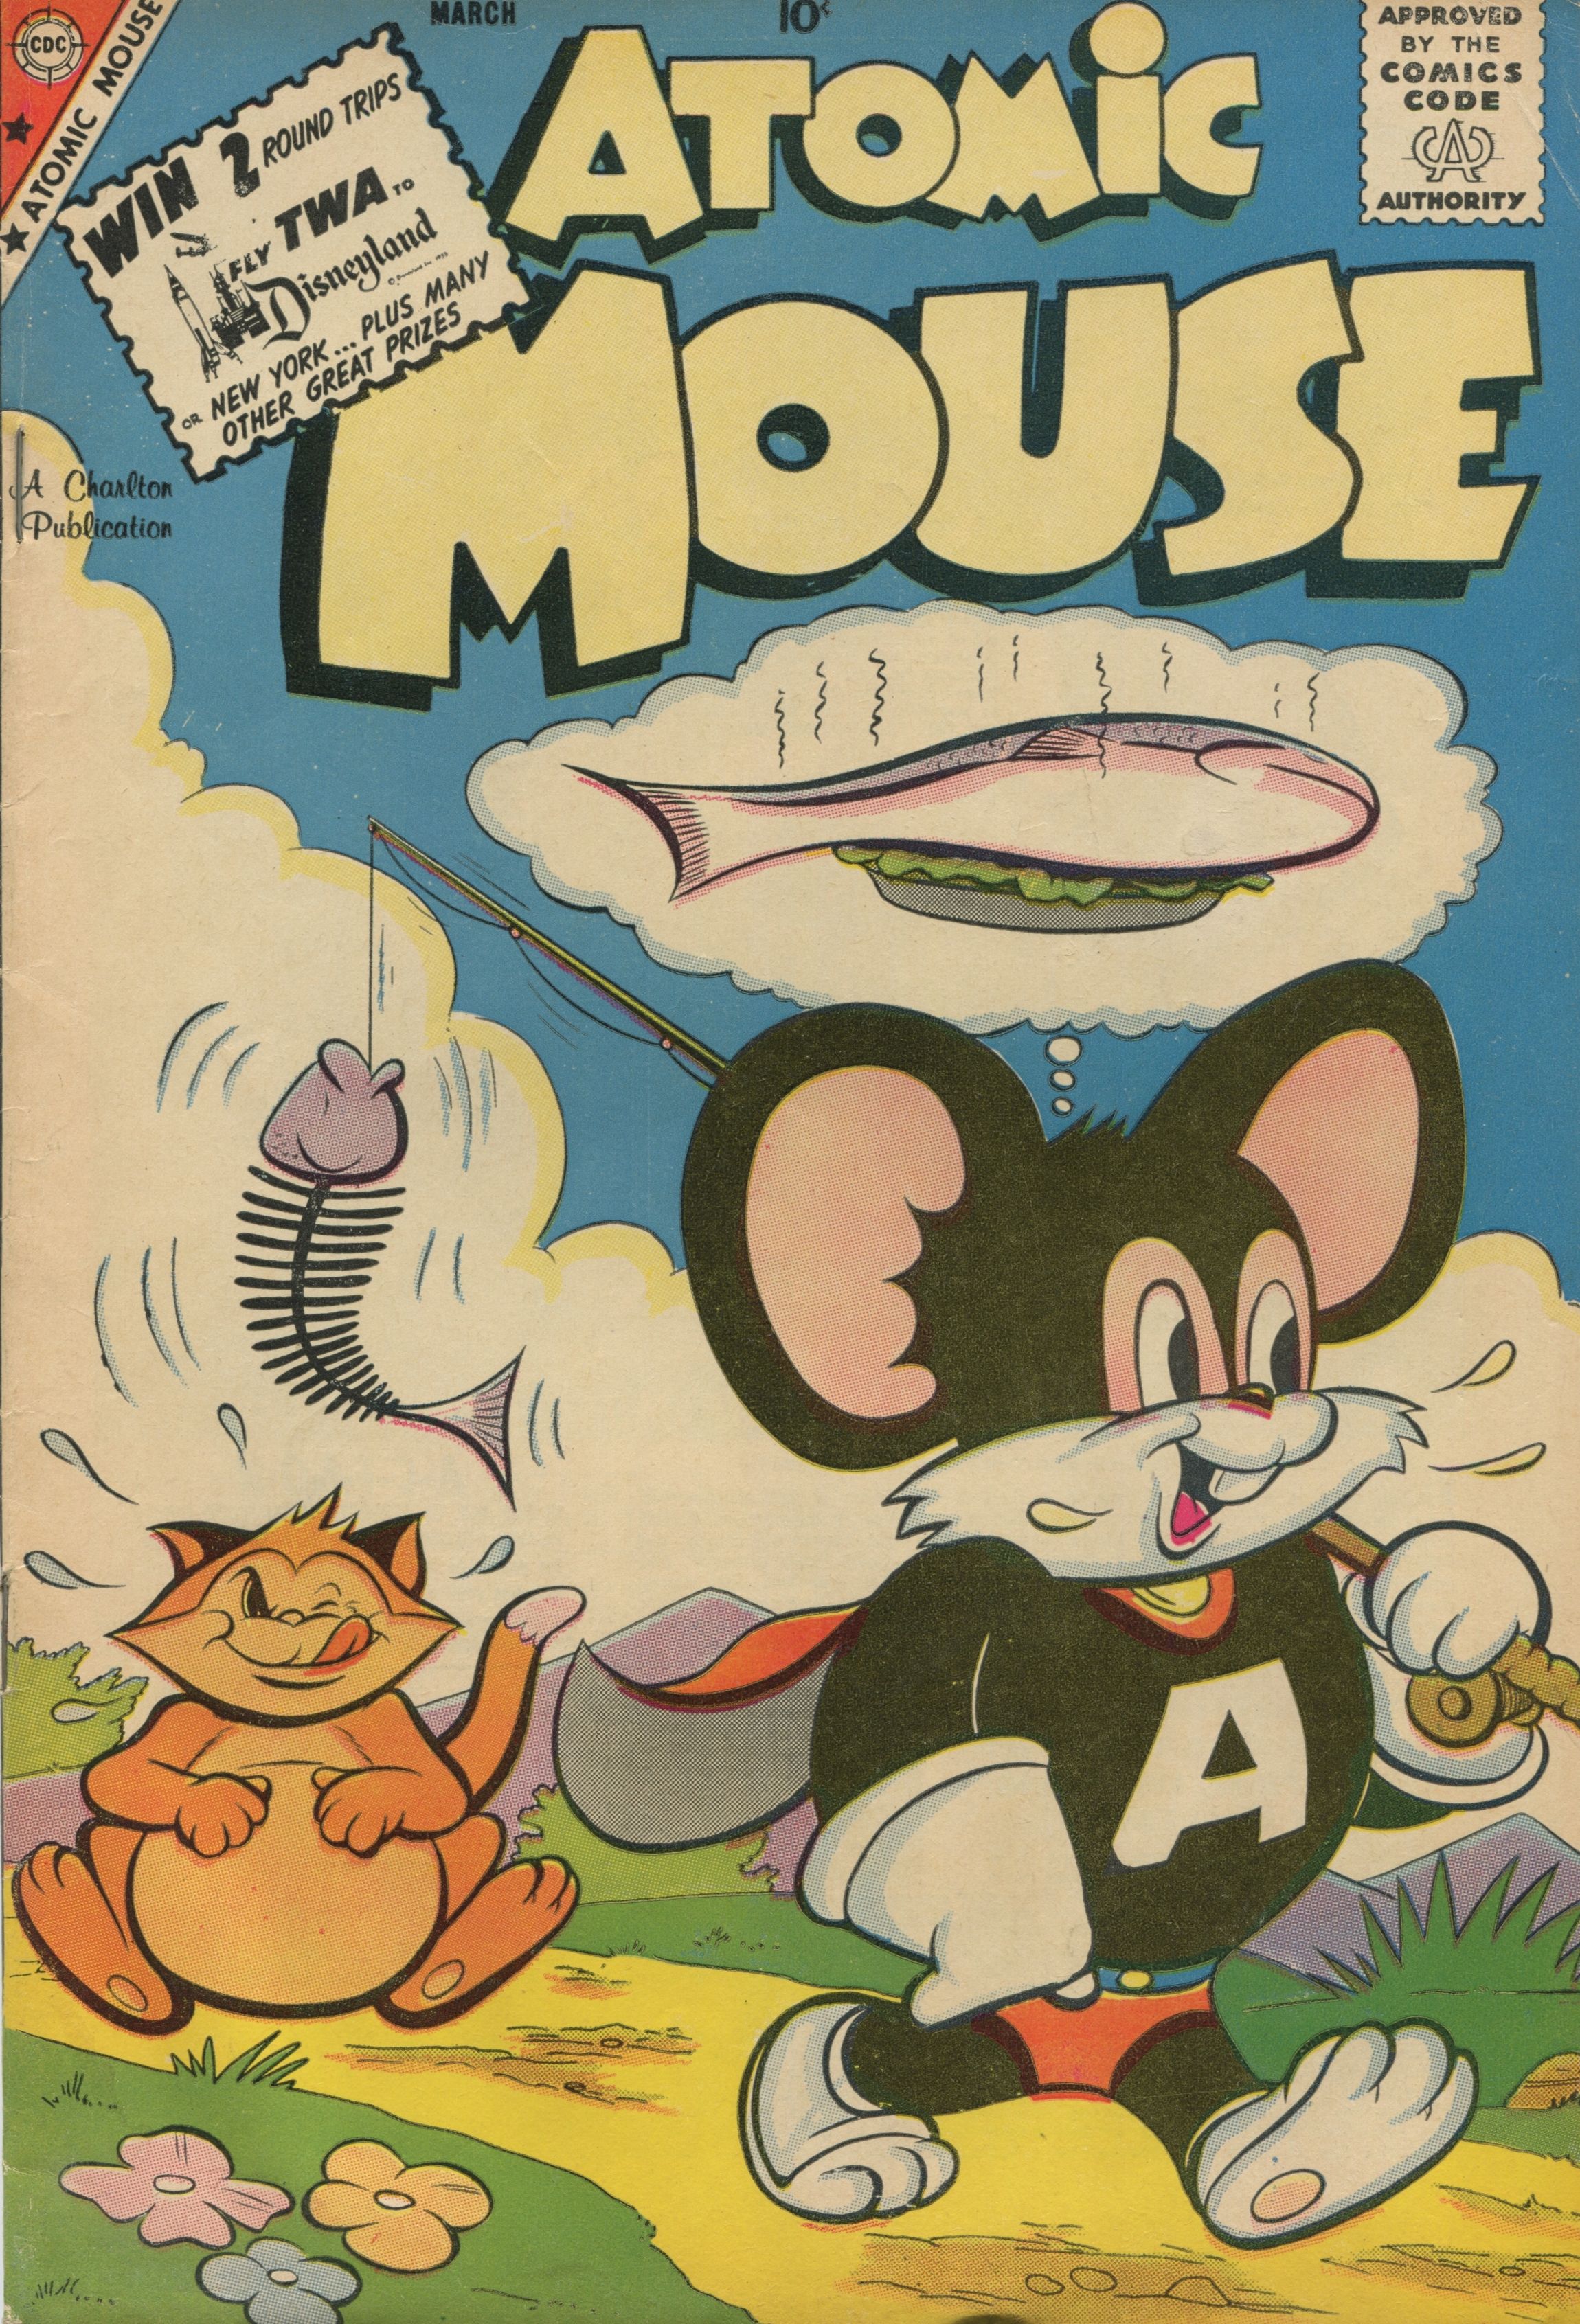 Read online Atomic Mouse comic -  Issue #35 - 1